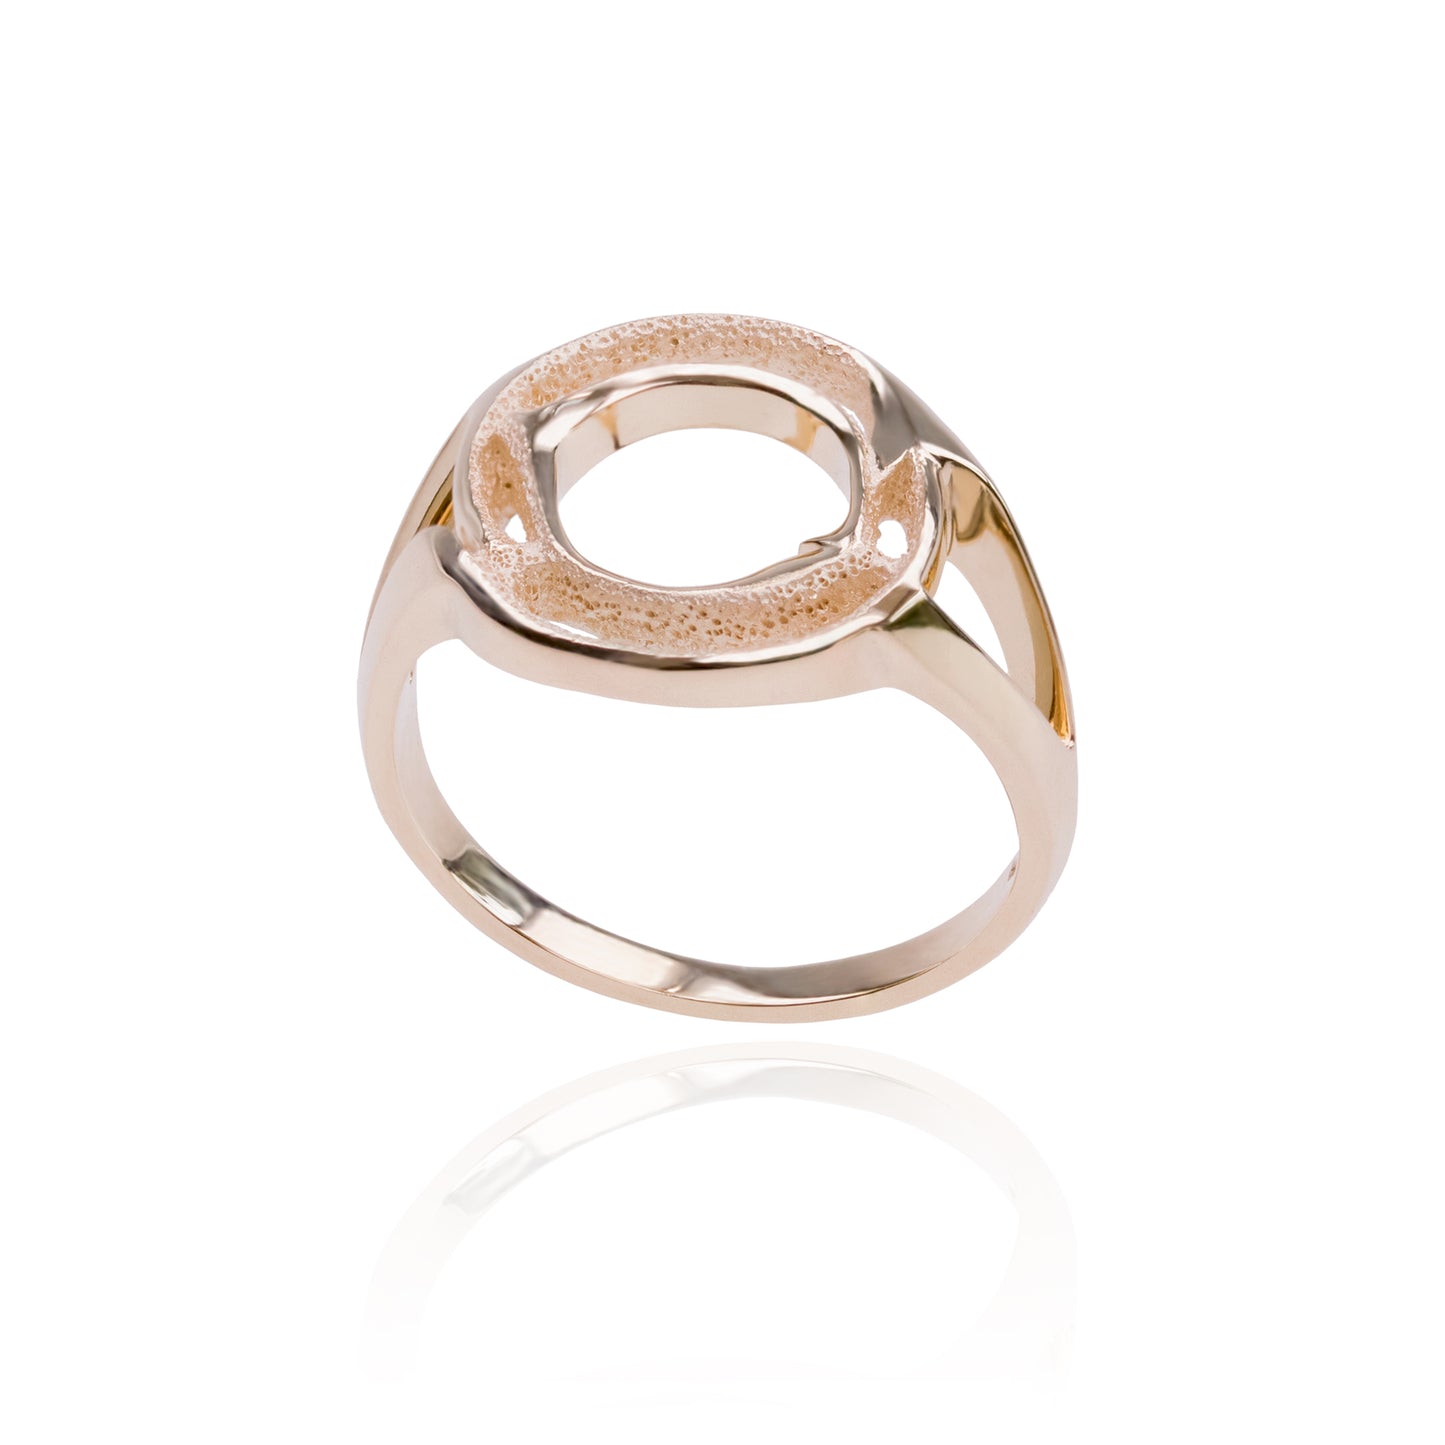 Orme-Brown_Jewellery_Halo_Statement_Ring_Recycled_9ct_yellow_gold_ethical_sustainable_hand